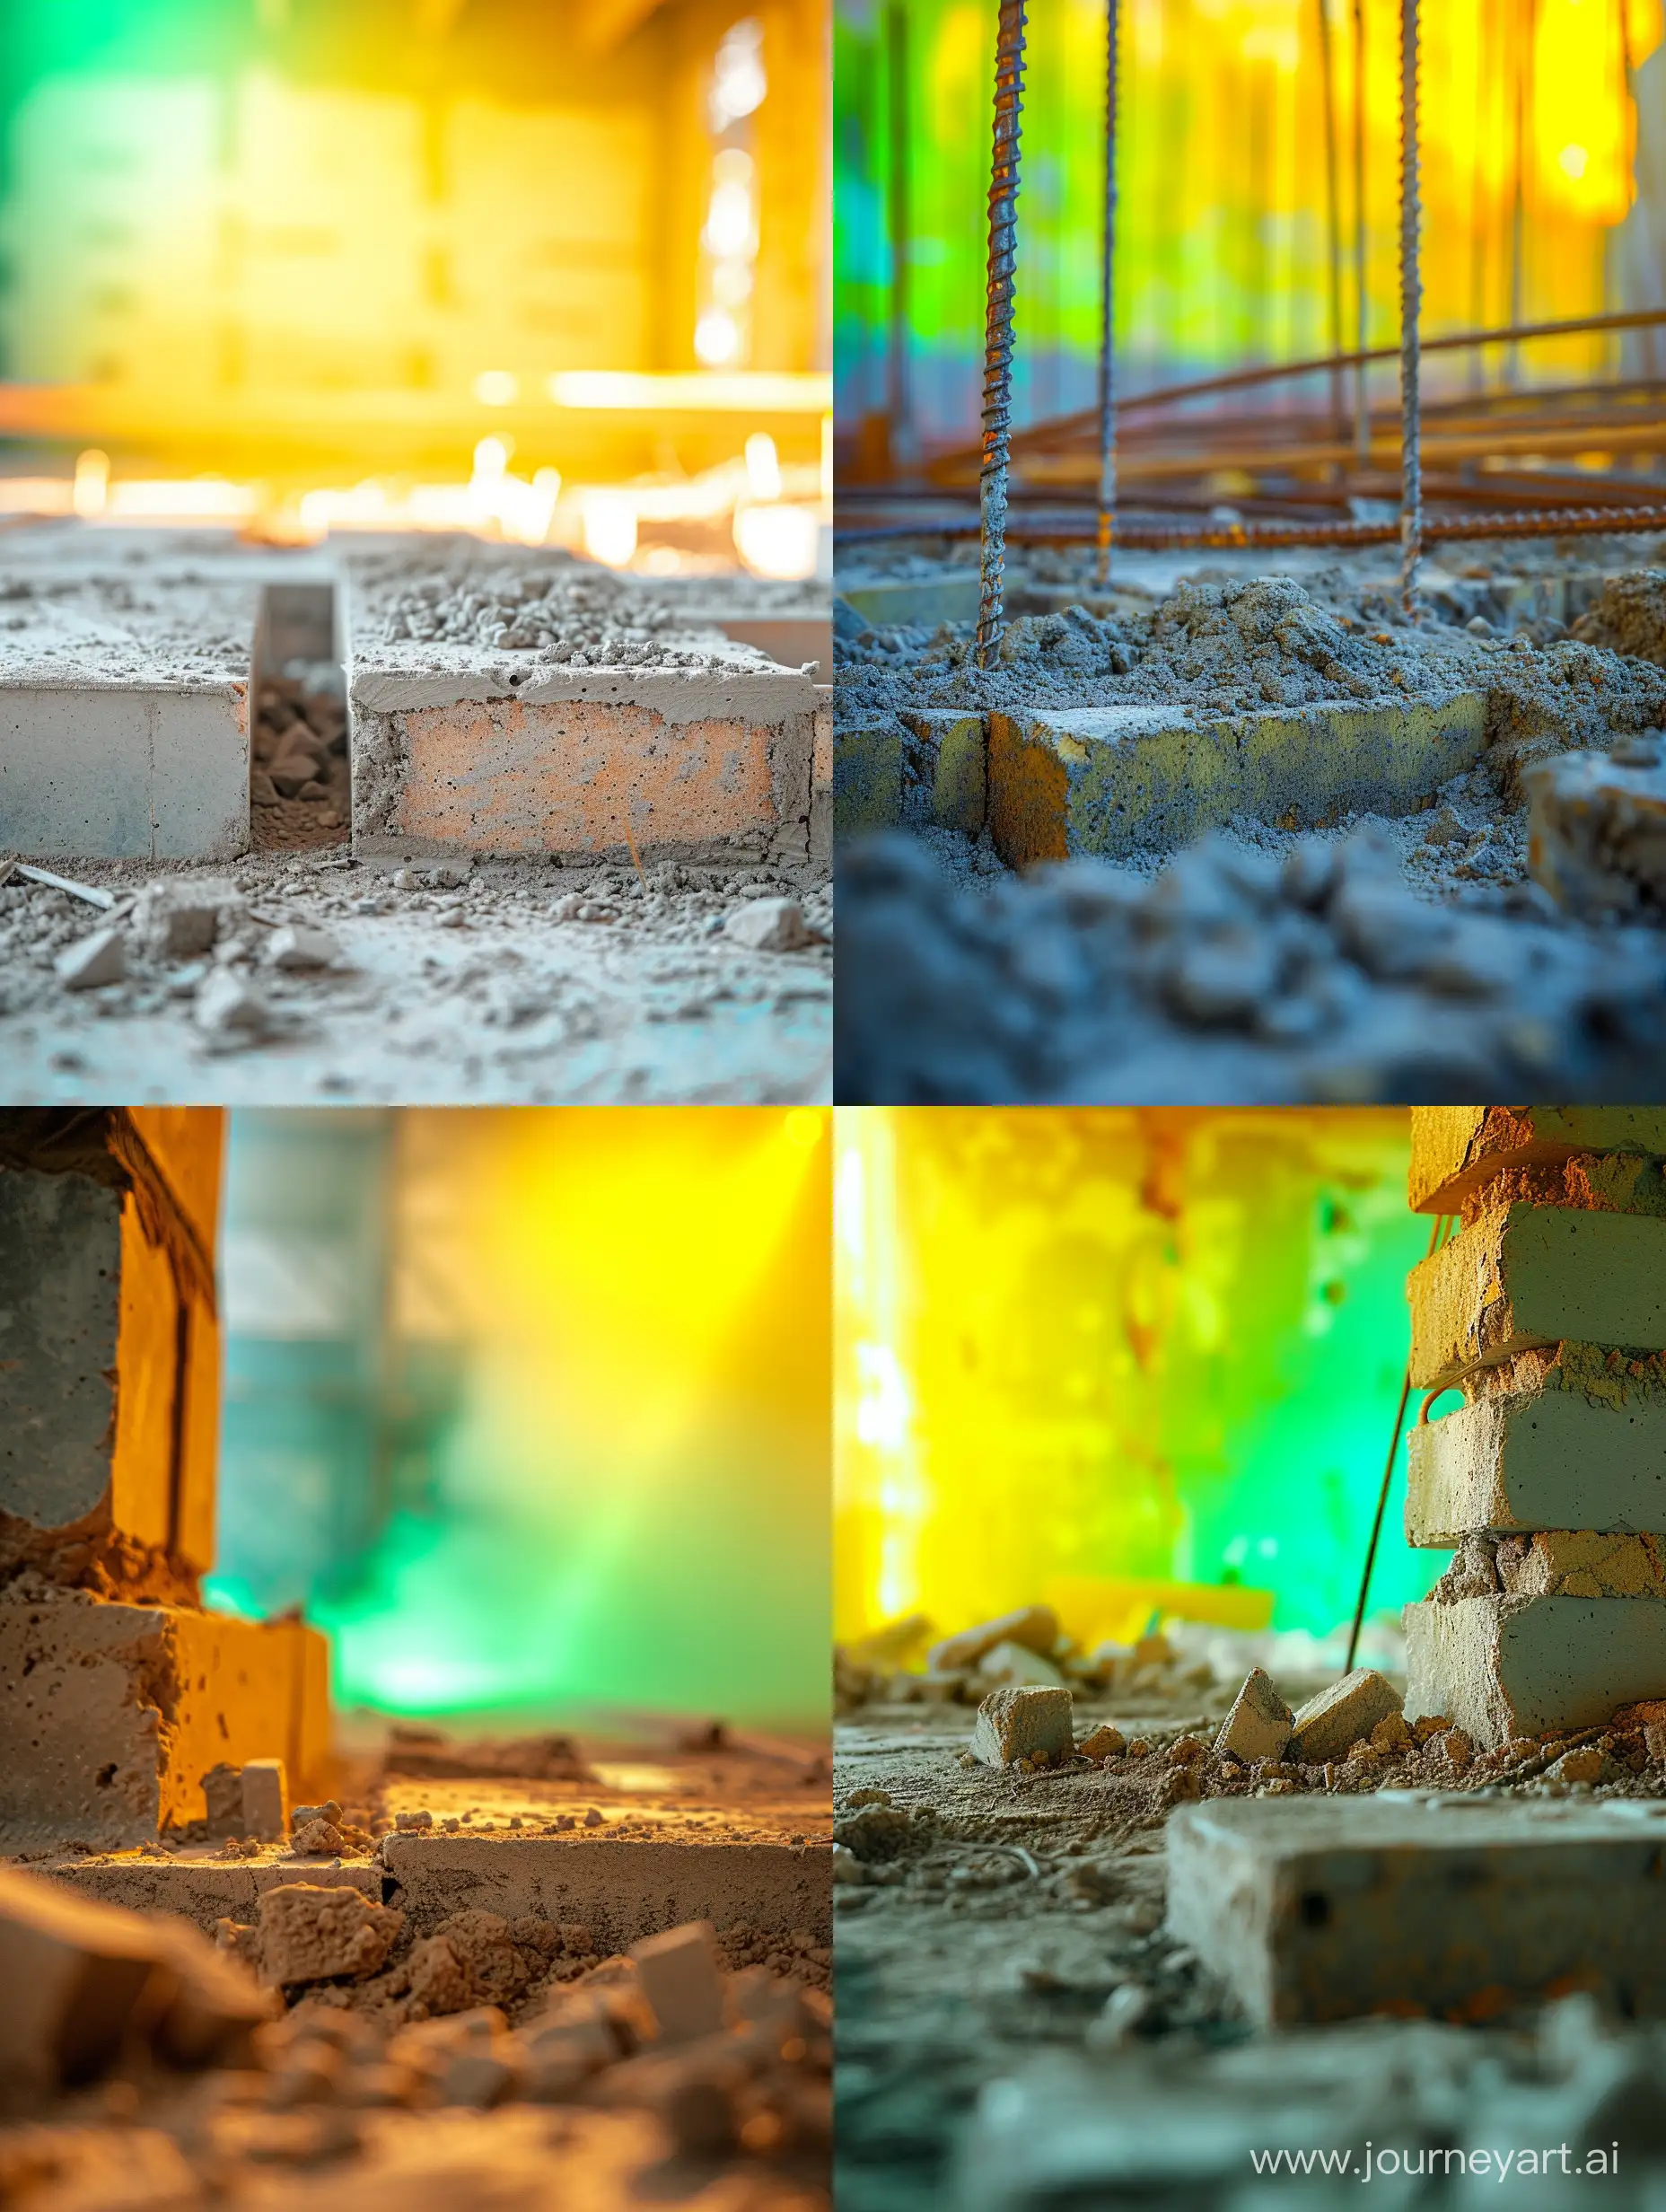 ultra realistic, close up construction site area. there is cement and bricks. yellow and green light behind. canon eos-id x mark iii dslr --v 6.0